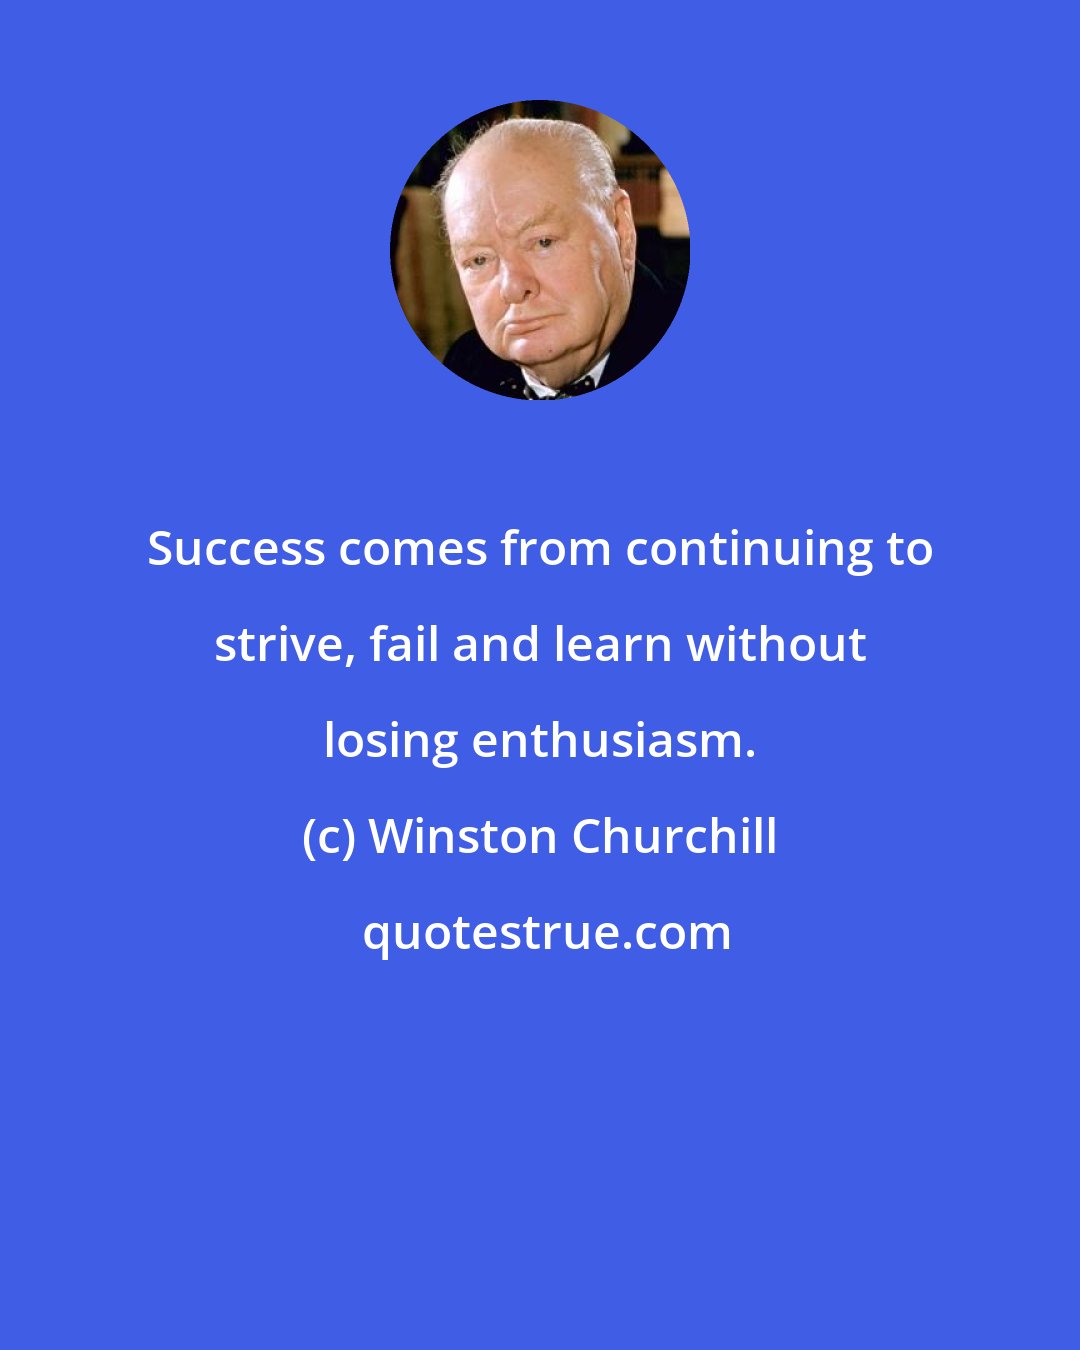 Winston Churchill: Success comes from continuing to strive, fail and learn without losing enthusiasm.